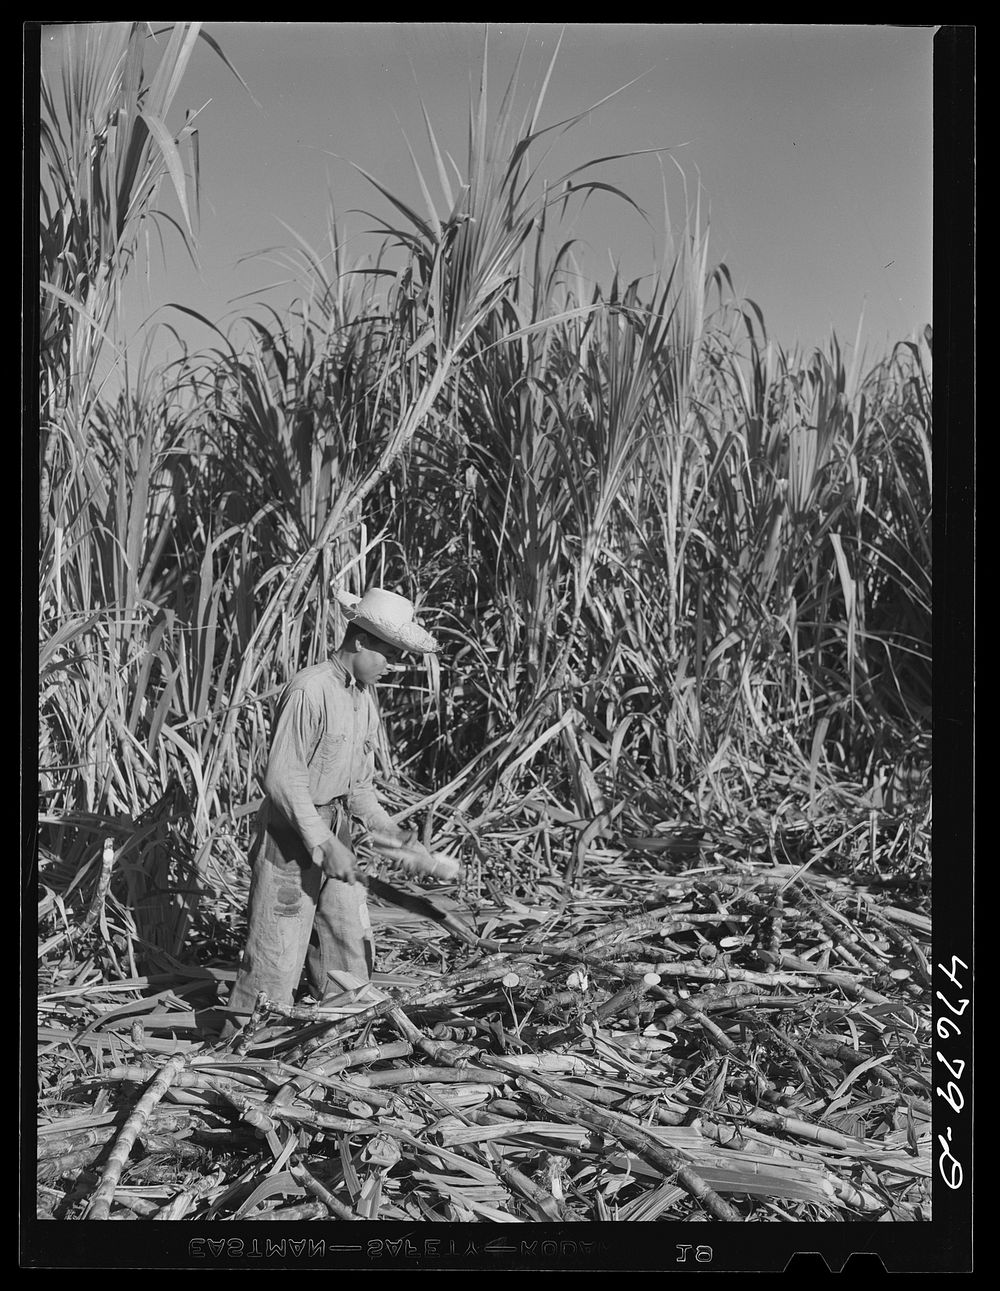 [Untitled photo, possibly related to: Guanica, Puerto Rico (vicinity). Harvesting sugar cane in the field. The cattle in the…